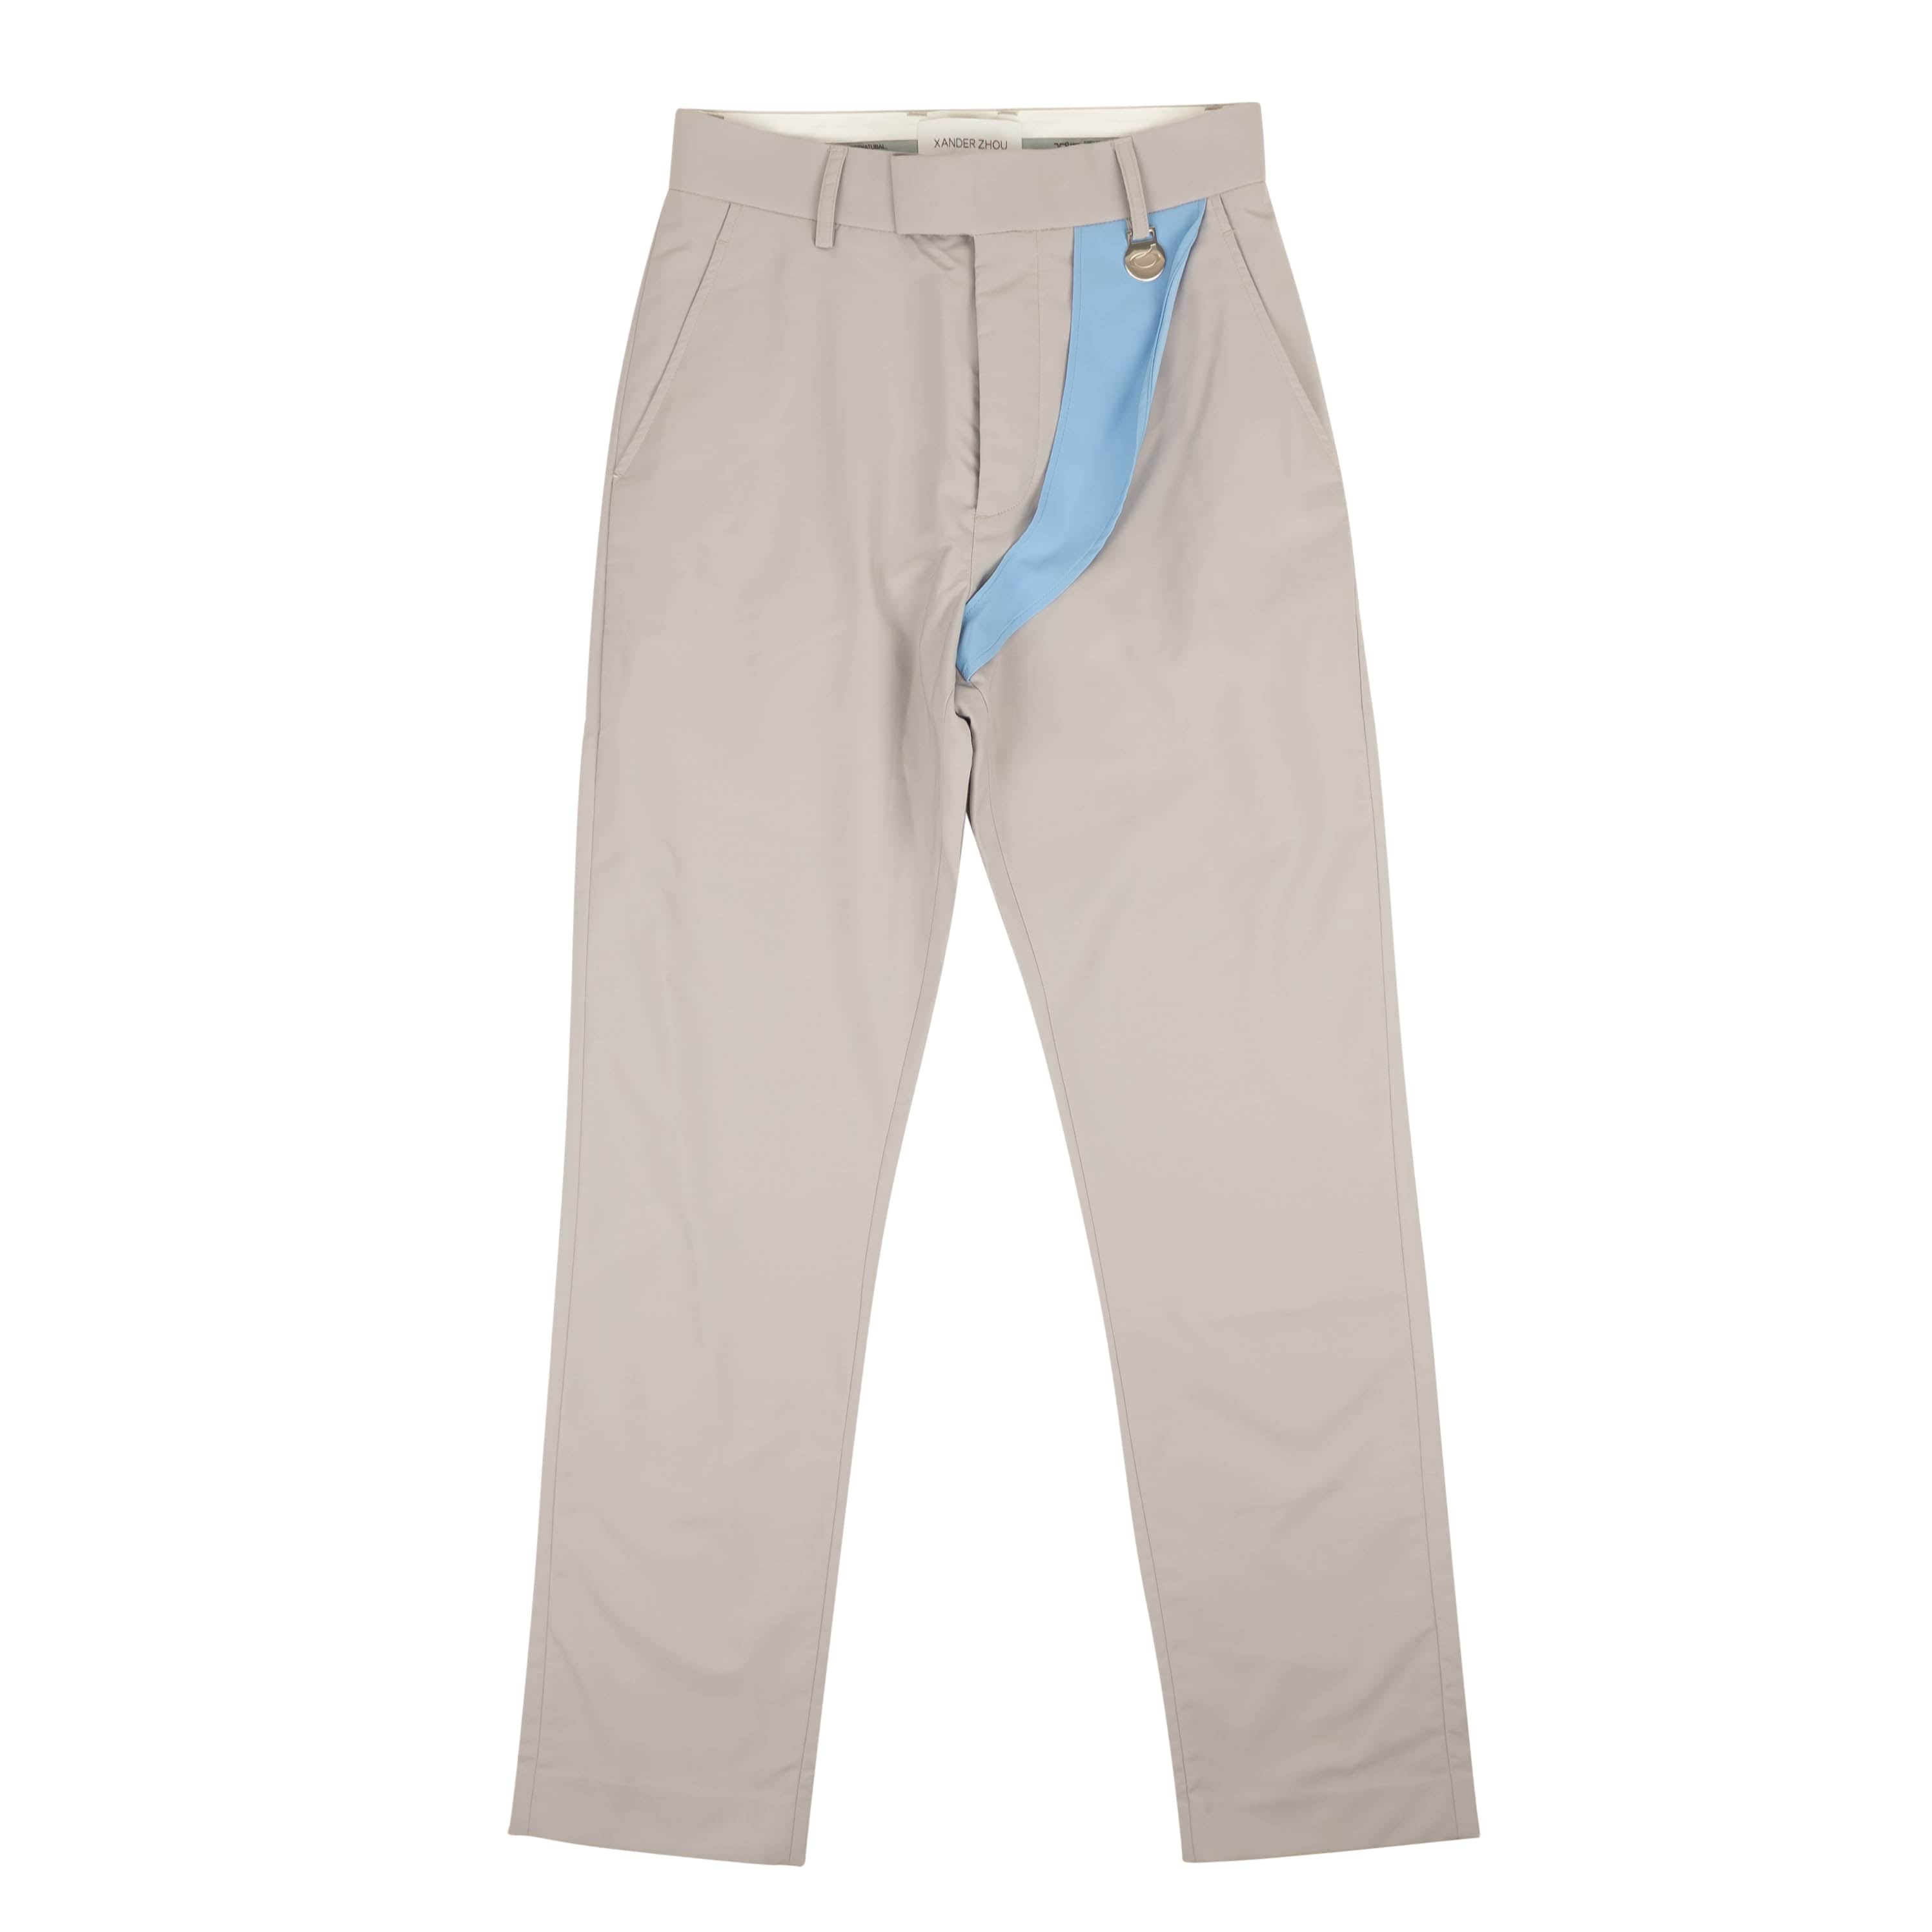 Xander Zhou 250-500, channelenable-all, chicmi, couponcollection, gender-mens, main-clothing, mens-casual-pants, mens-shoes, MixedApparel, size-46, size-48, size-50, xander-zhou 46 / AW19P09-8 Gray Blue Loop Trousers 95-XZO-1003/46 95-XZO-1003/46